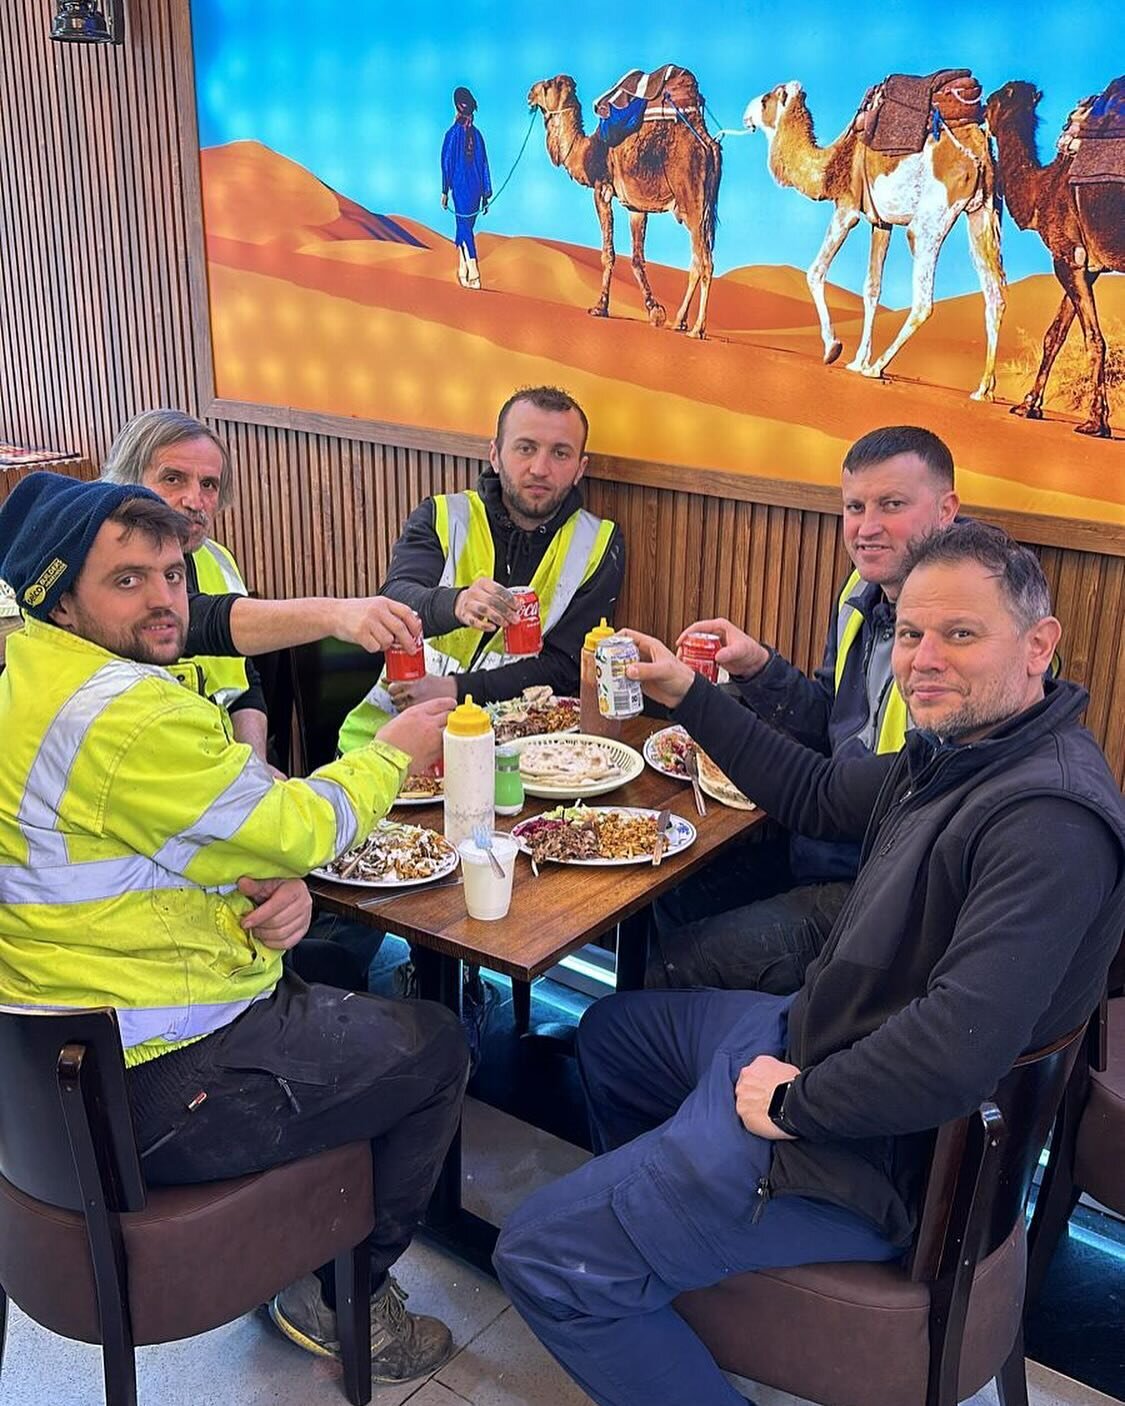 Our amazing team have been hard at work all weekend from Oxford Street to Finsbury Park.  A well deserved lunch